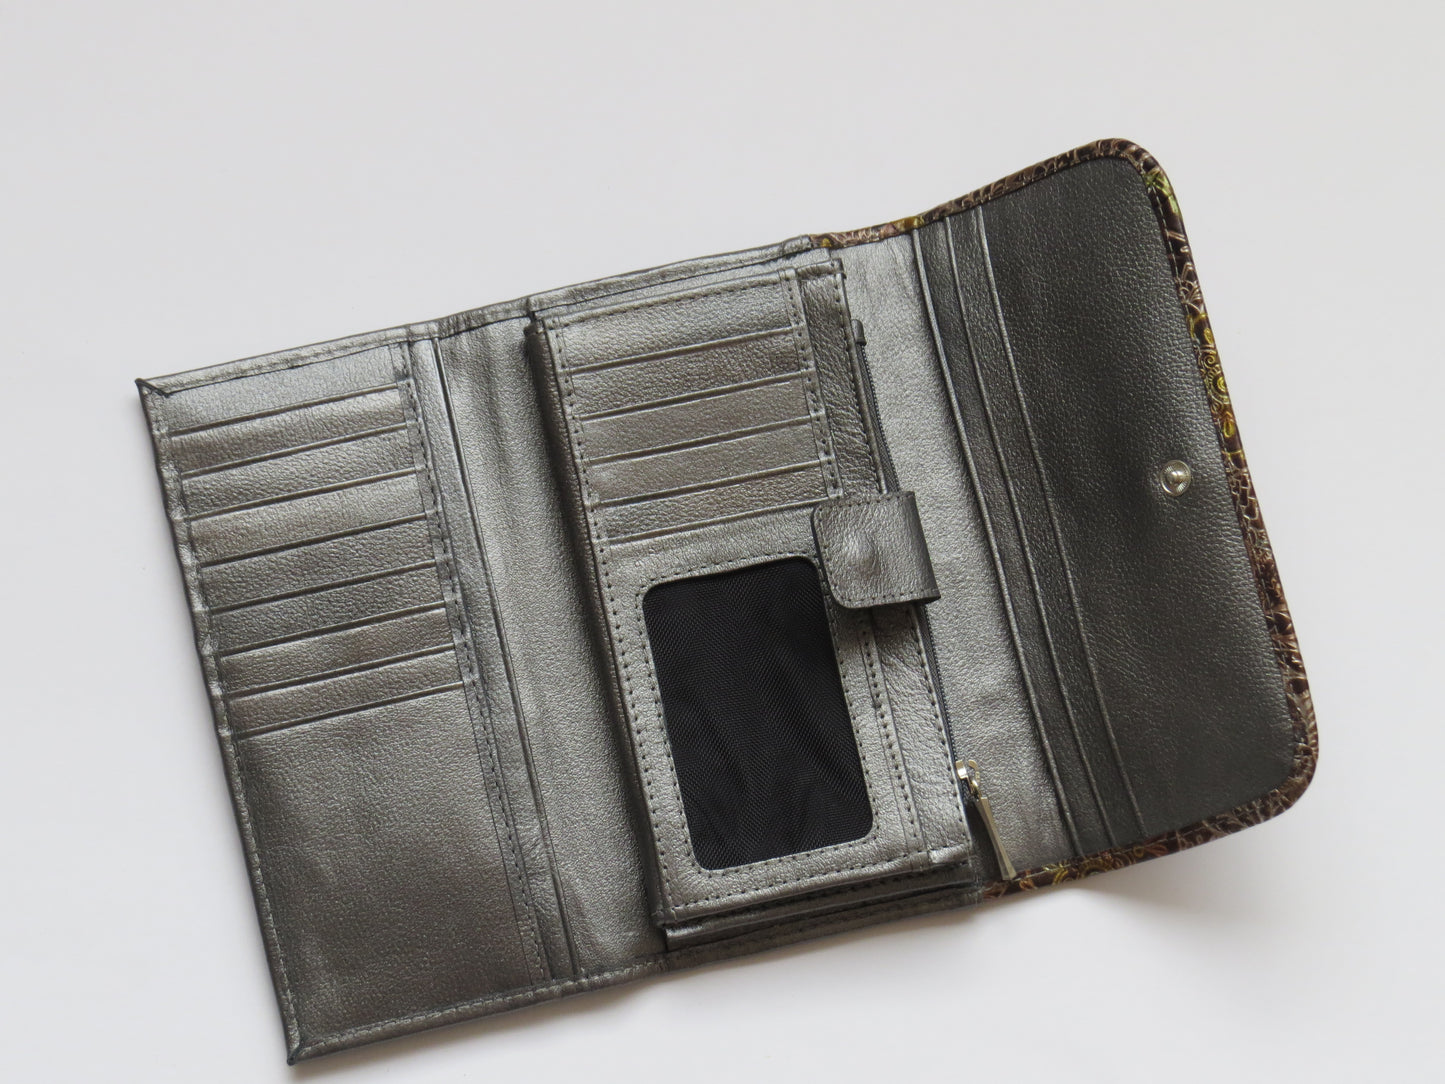 The Dragonfly Women's Leather Wallet